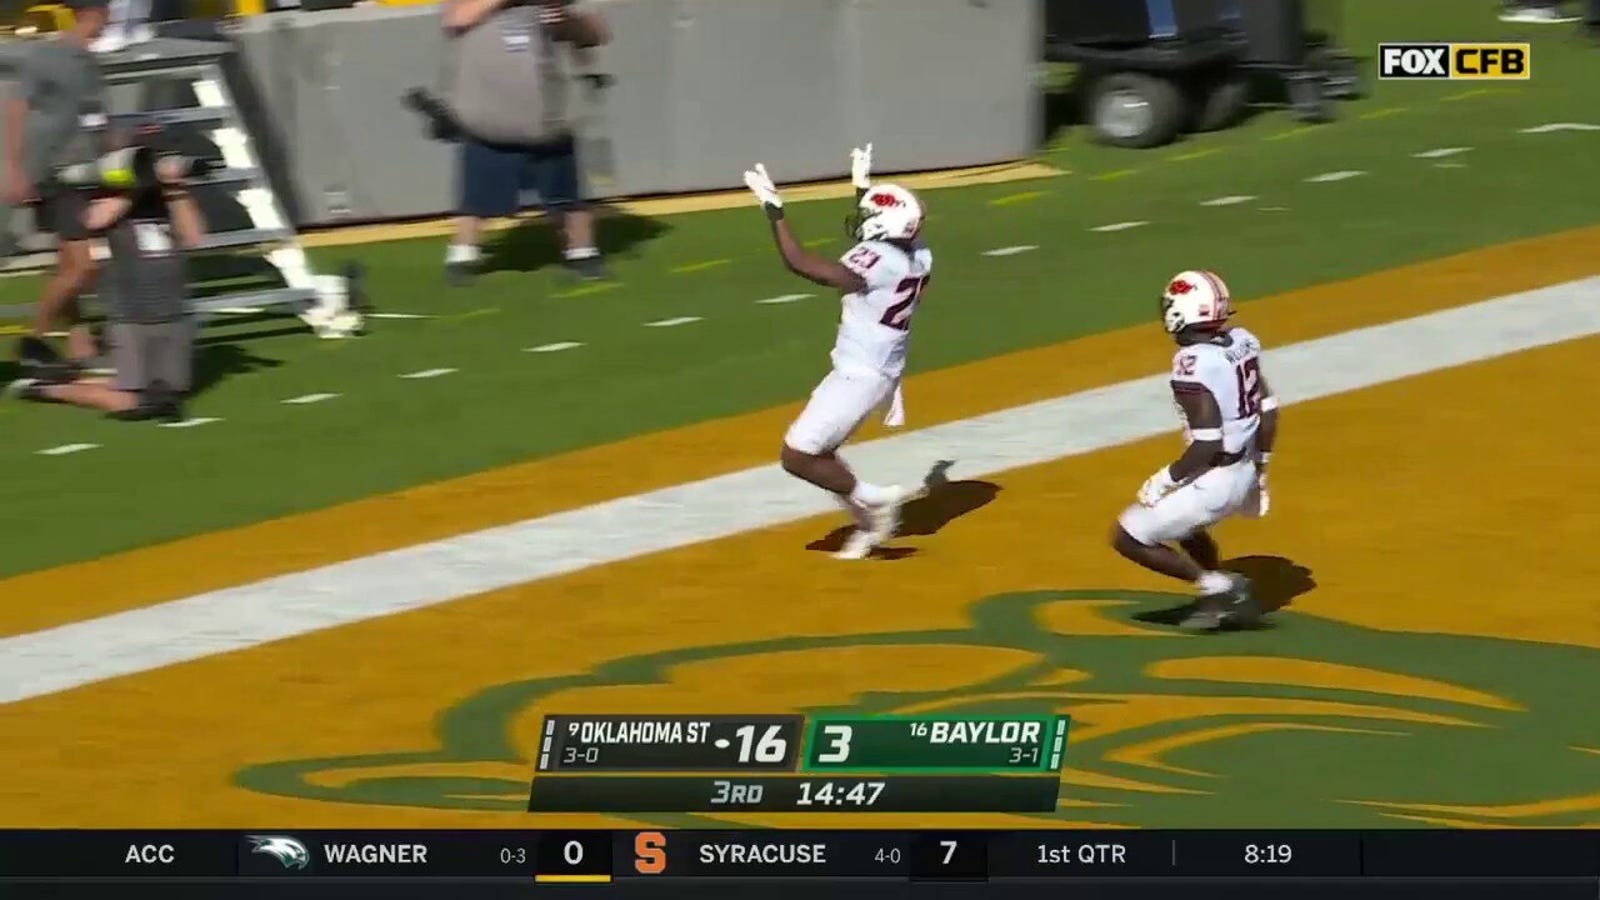 Oklahoma State takes a 23-3 lead over Baylor